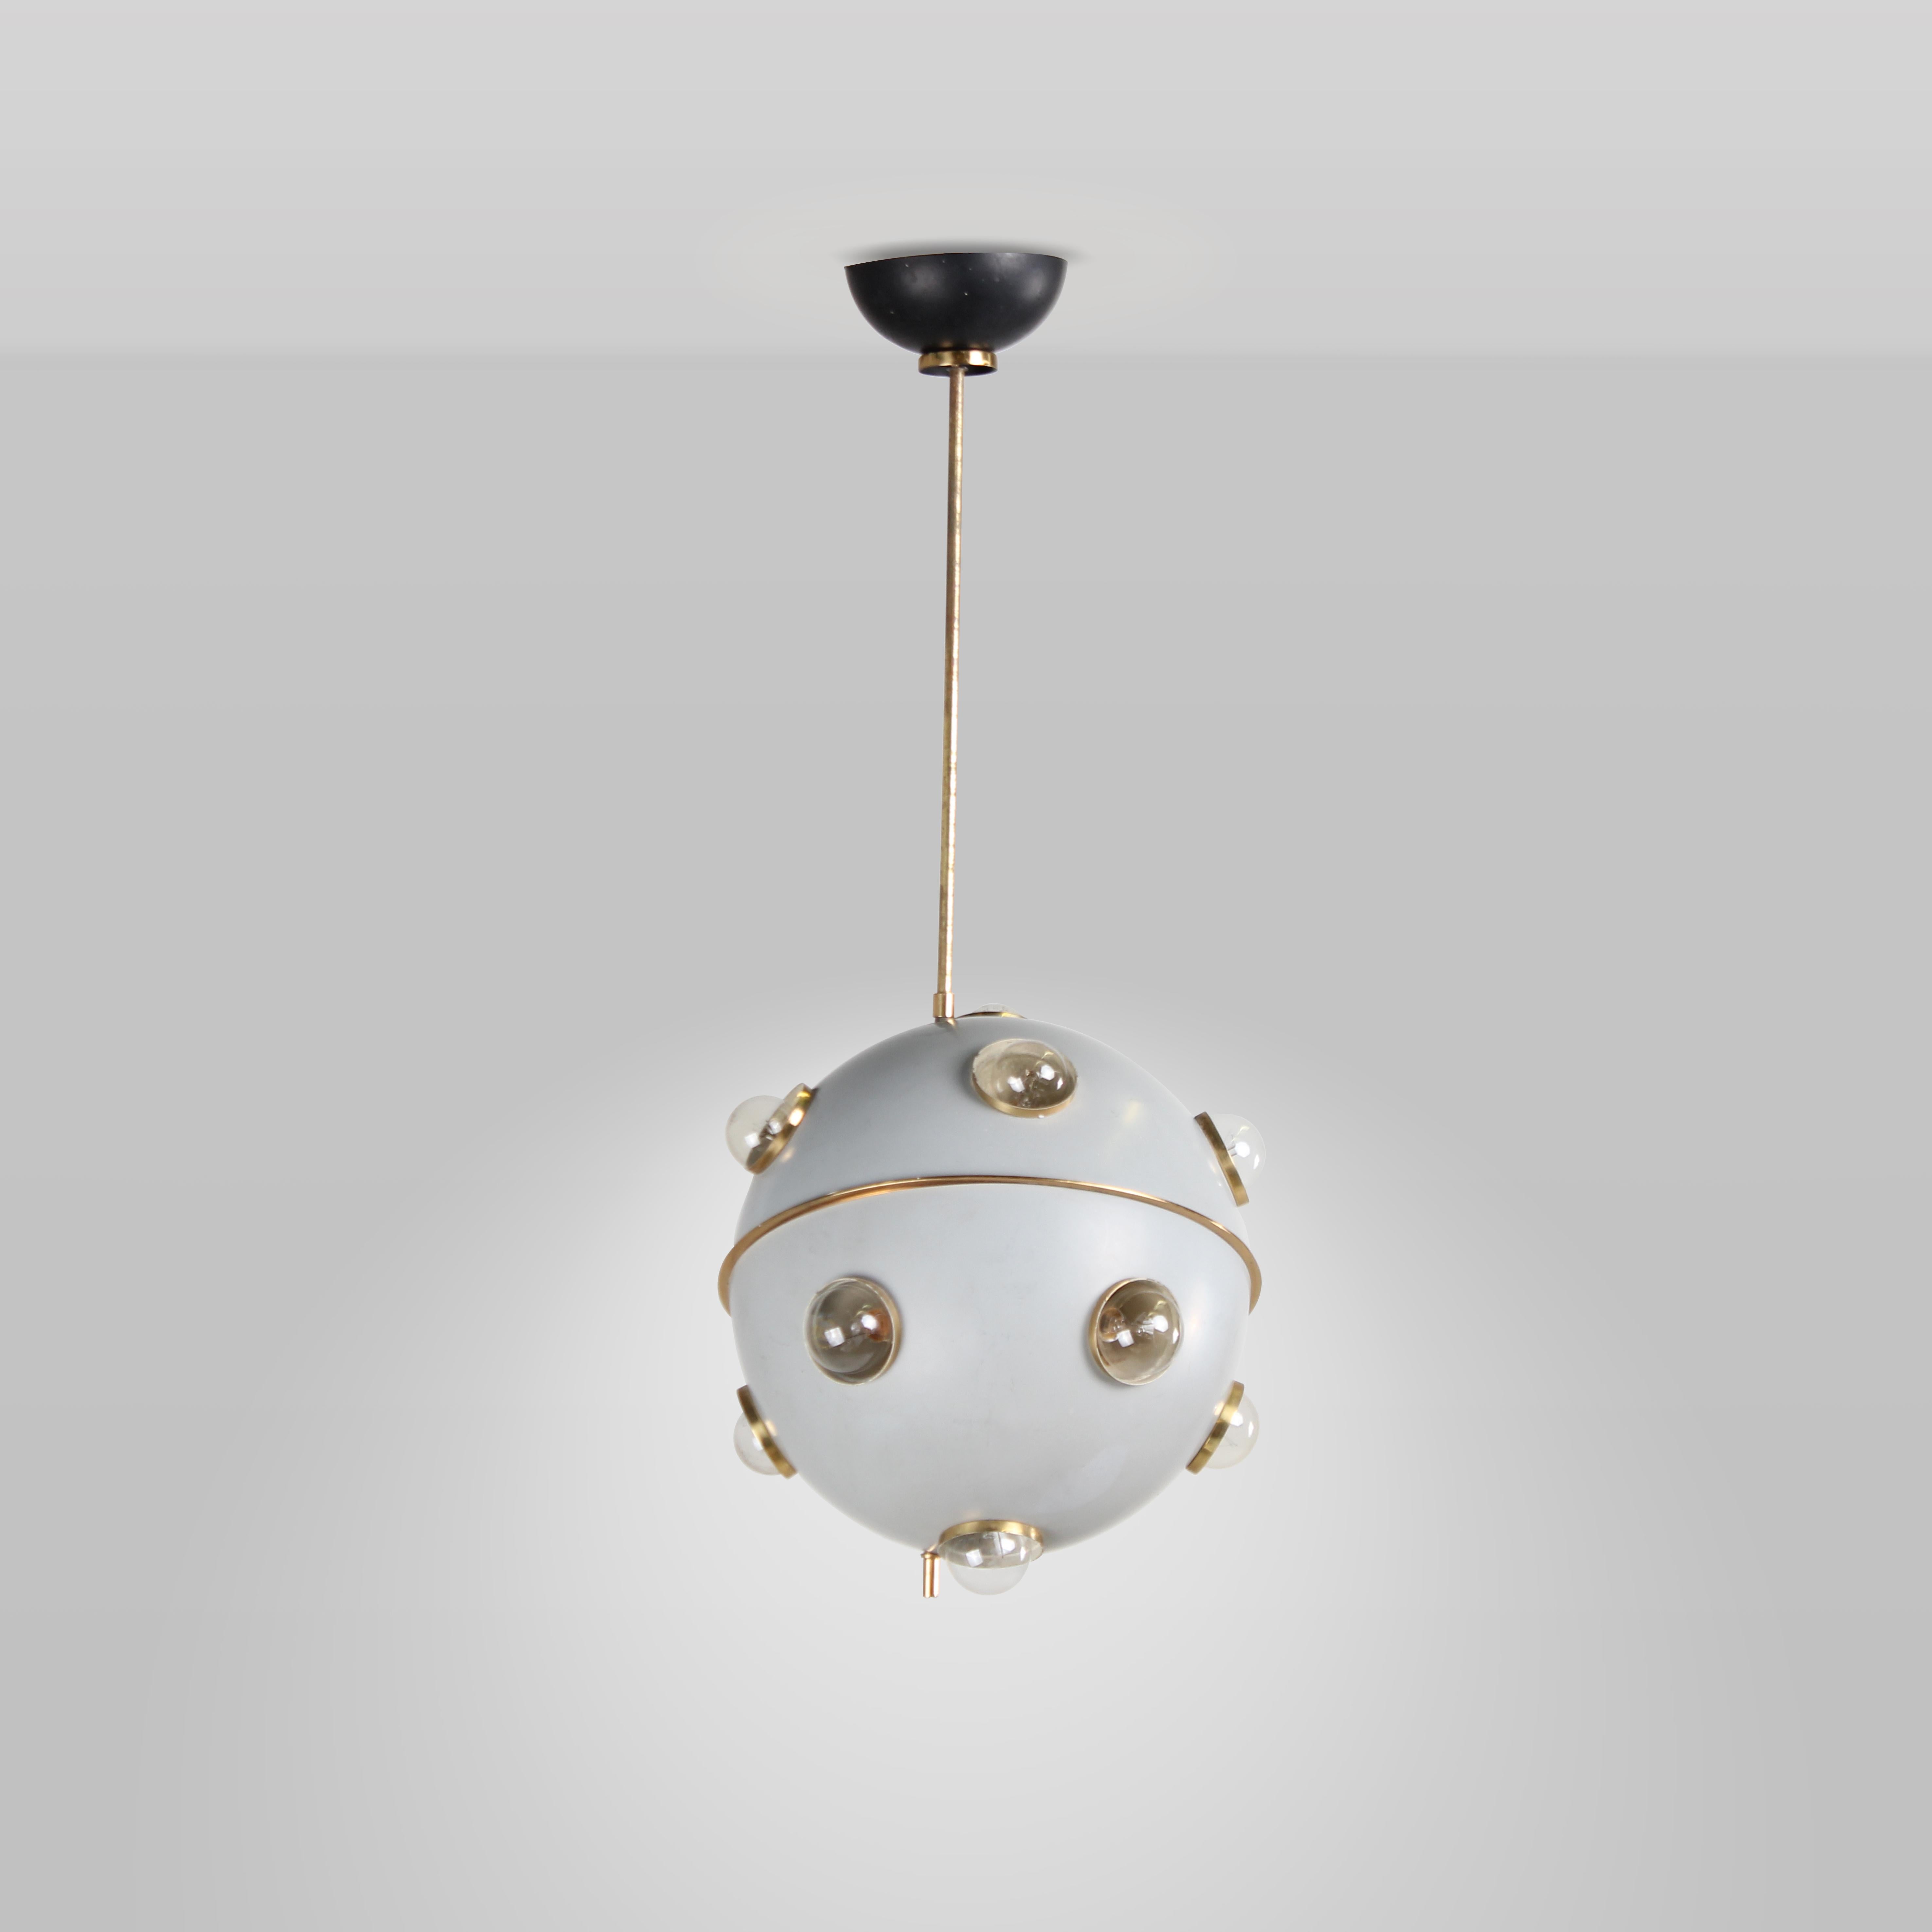 The Saturn chandelier is a exquisite and playful interior with a dreamlike and esoteric touch. Its impeccable craftsmanship in lacquered aluminum with polished brass, showcases Lumi's dedication to quality and style, typical of Italian design of the